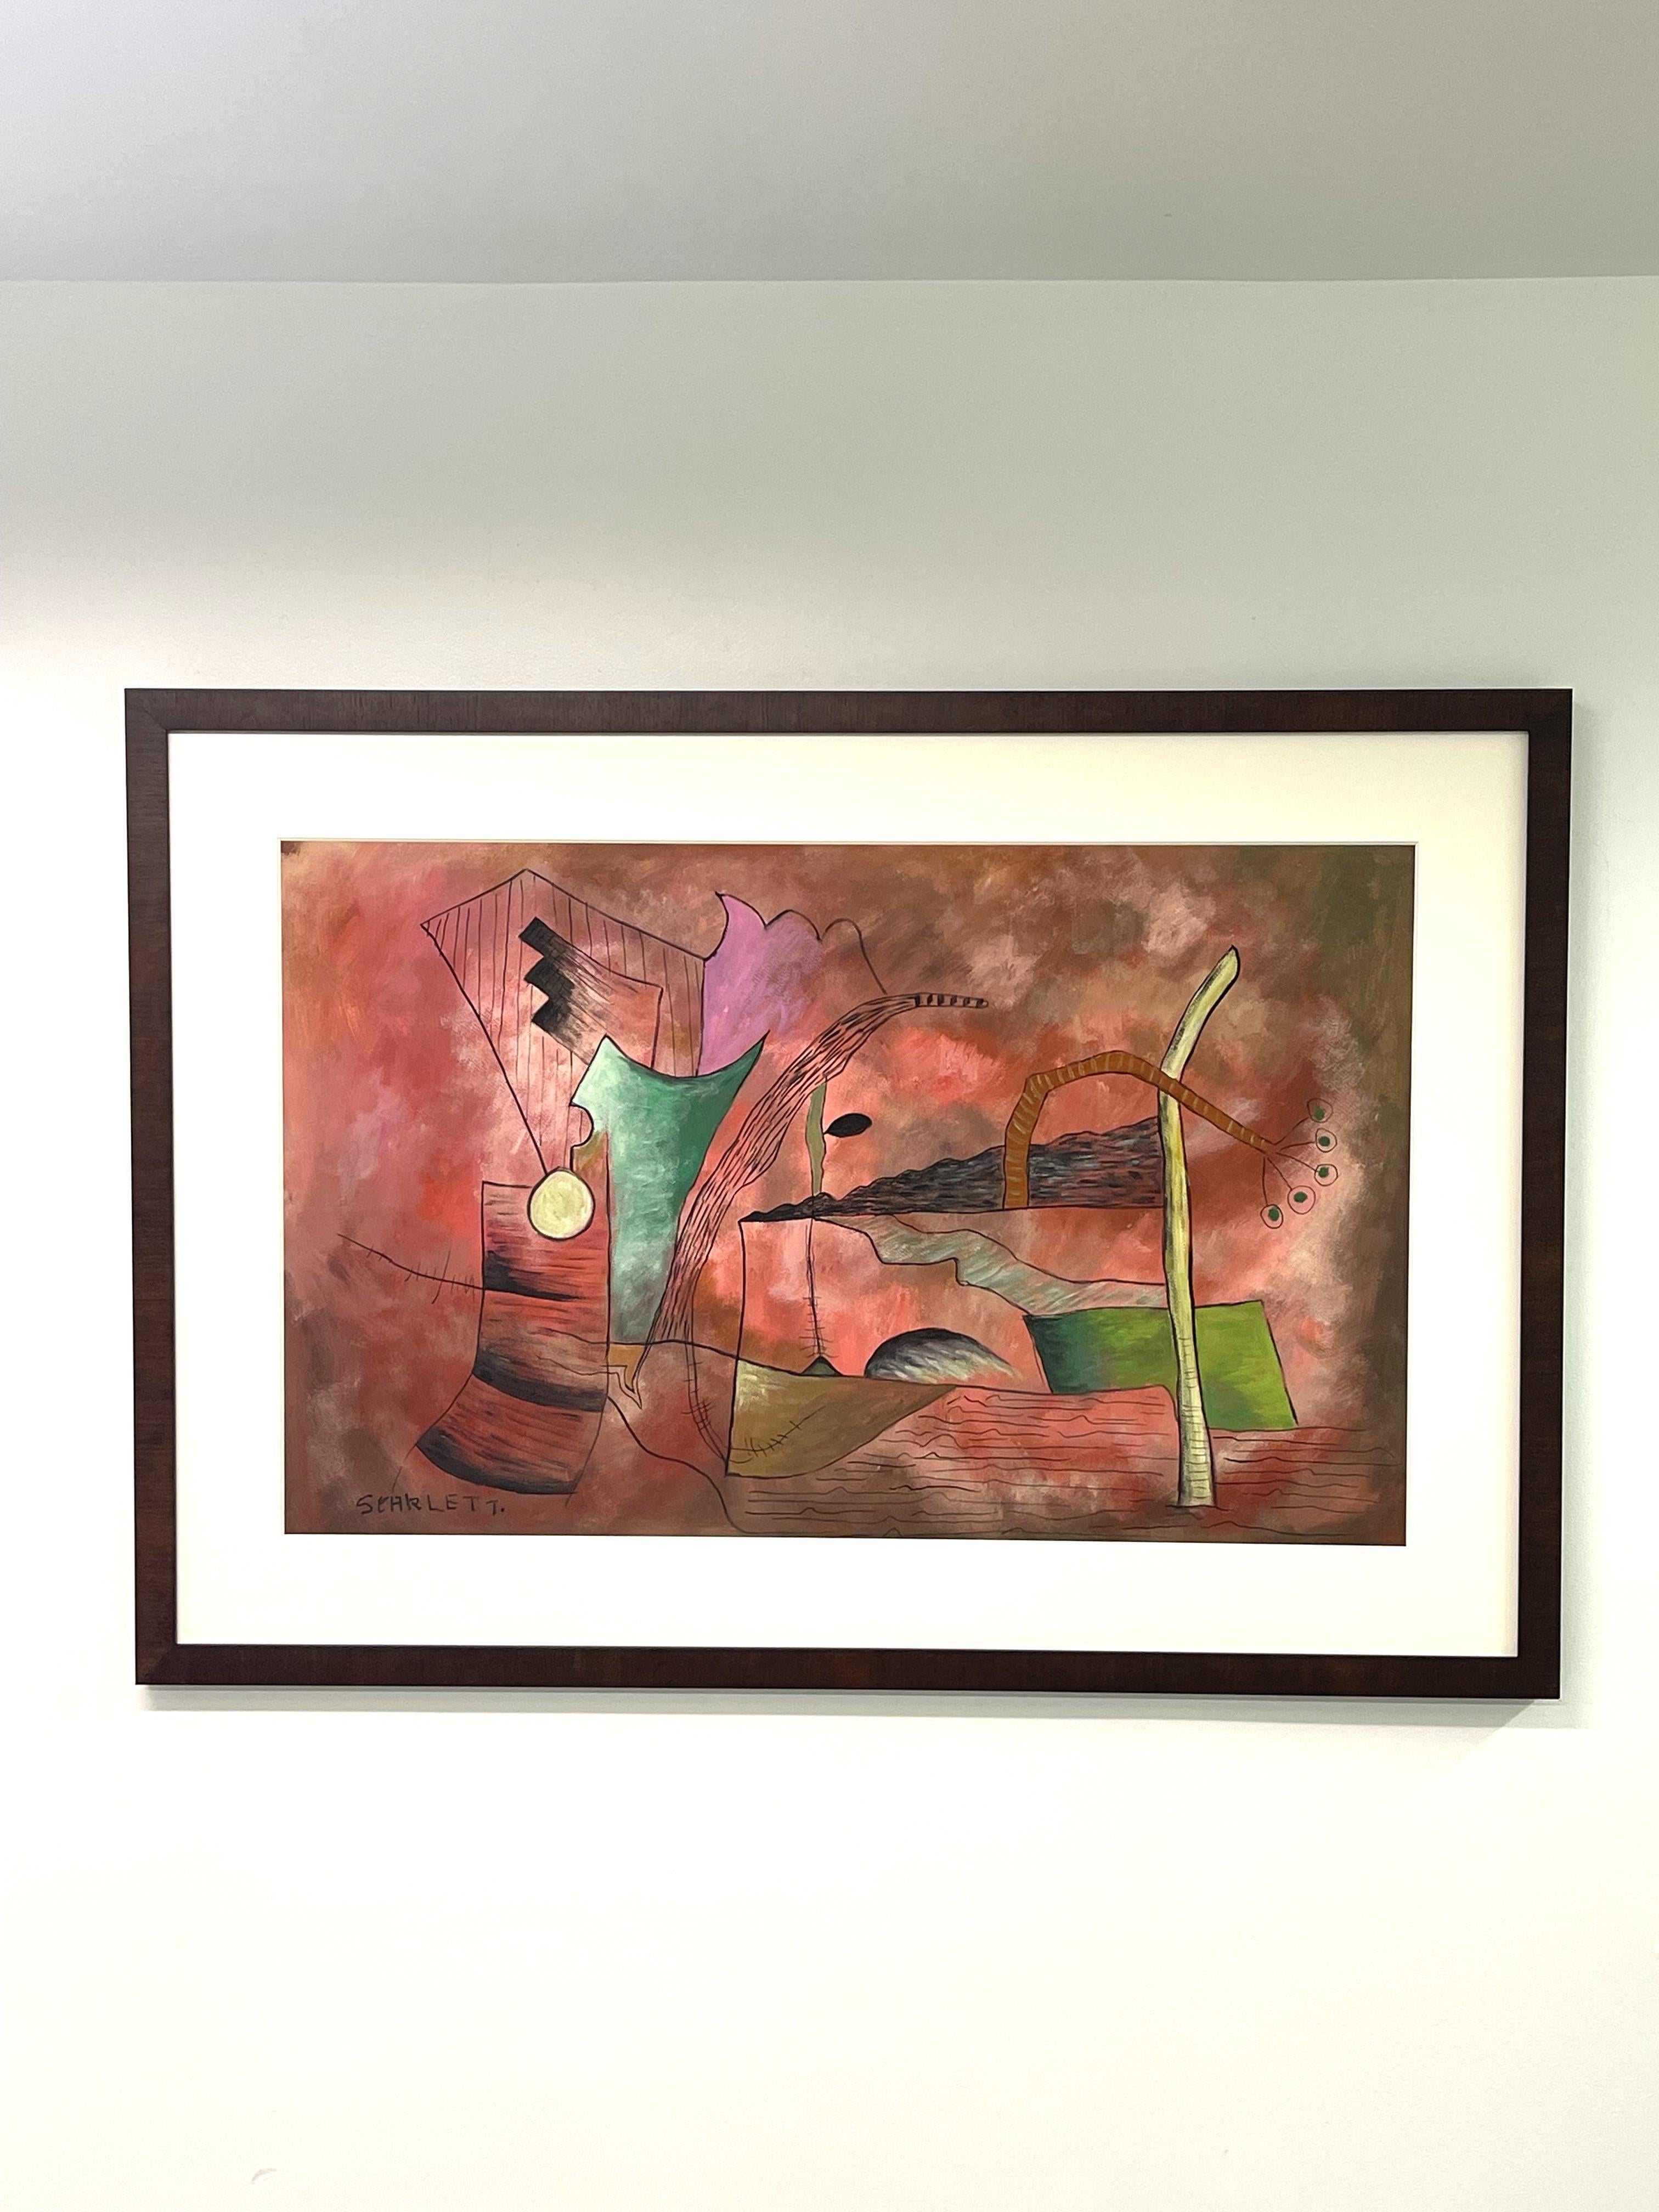 Untitled, Surrealist Landscape - Brown Abstract Painting by Rolph Scarlett